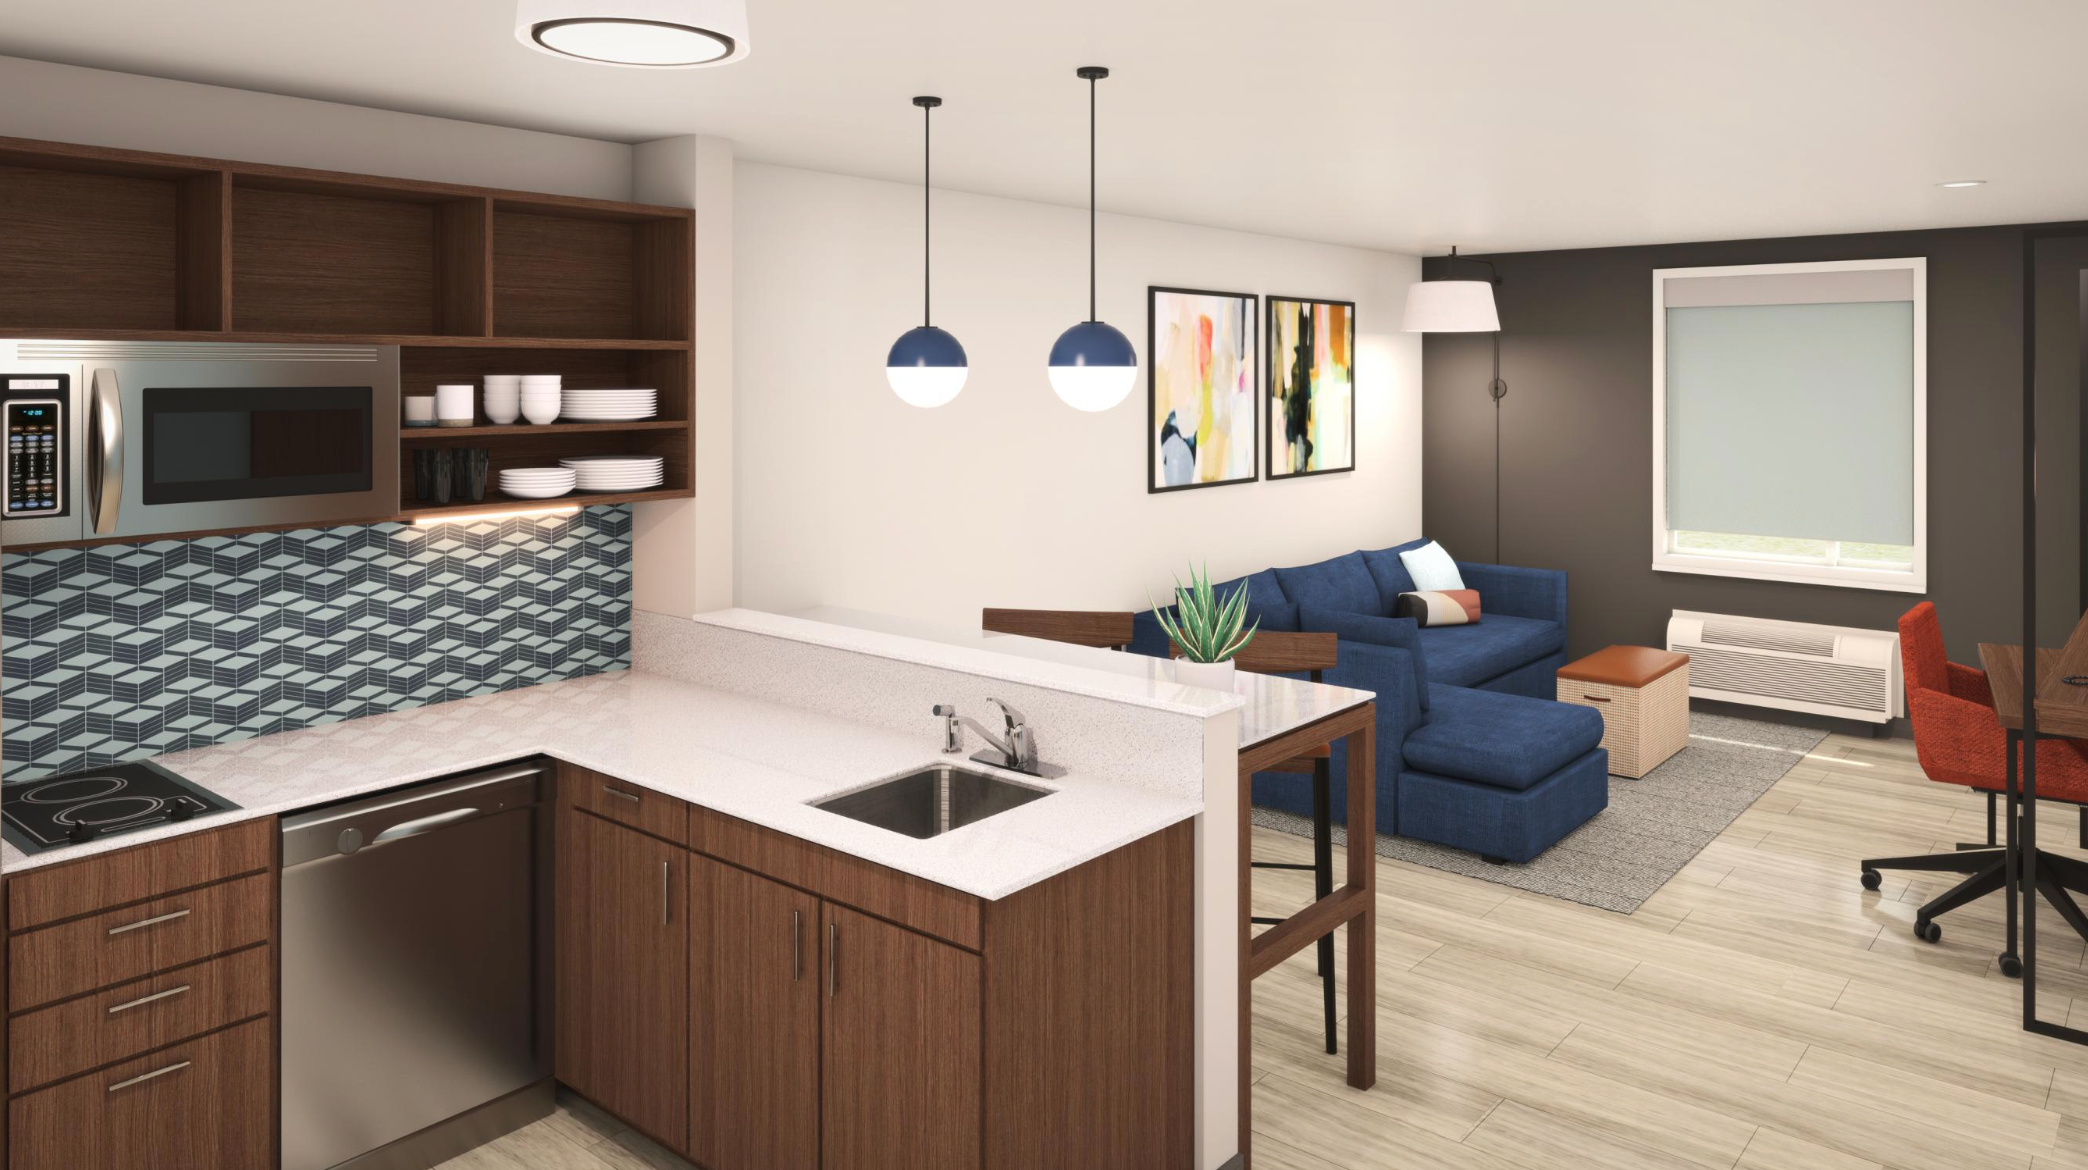 Everhome Suites kitchen and living areas